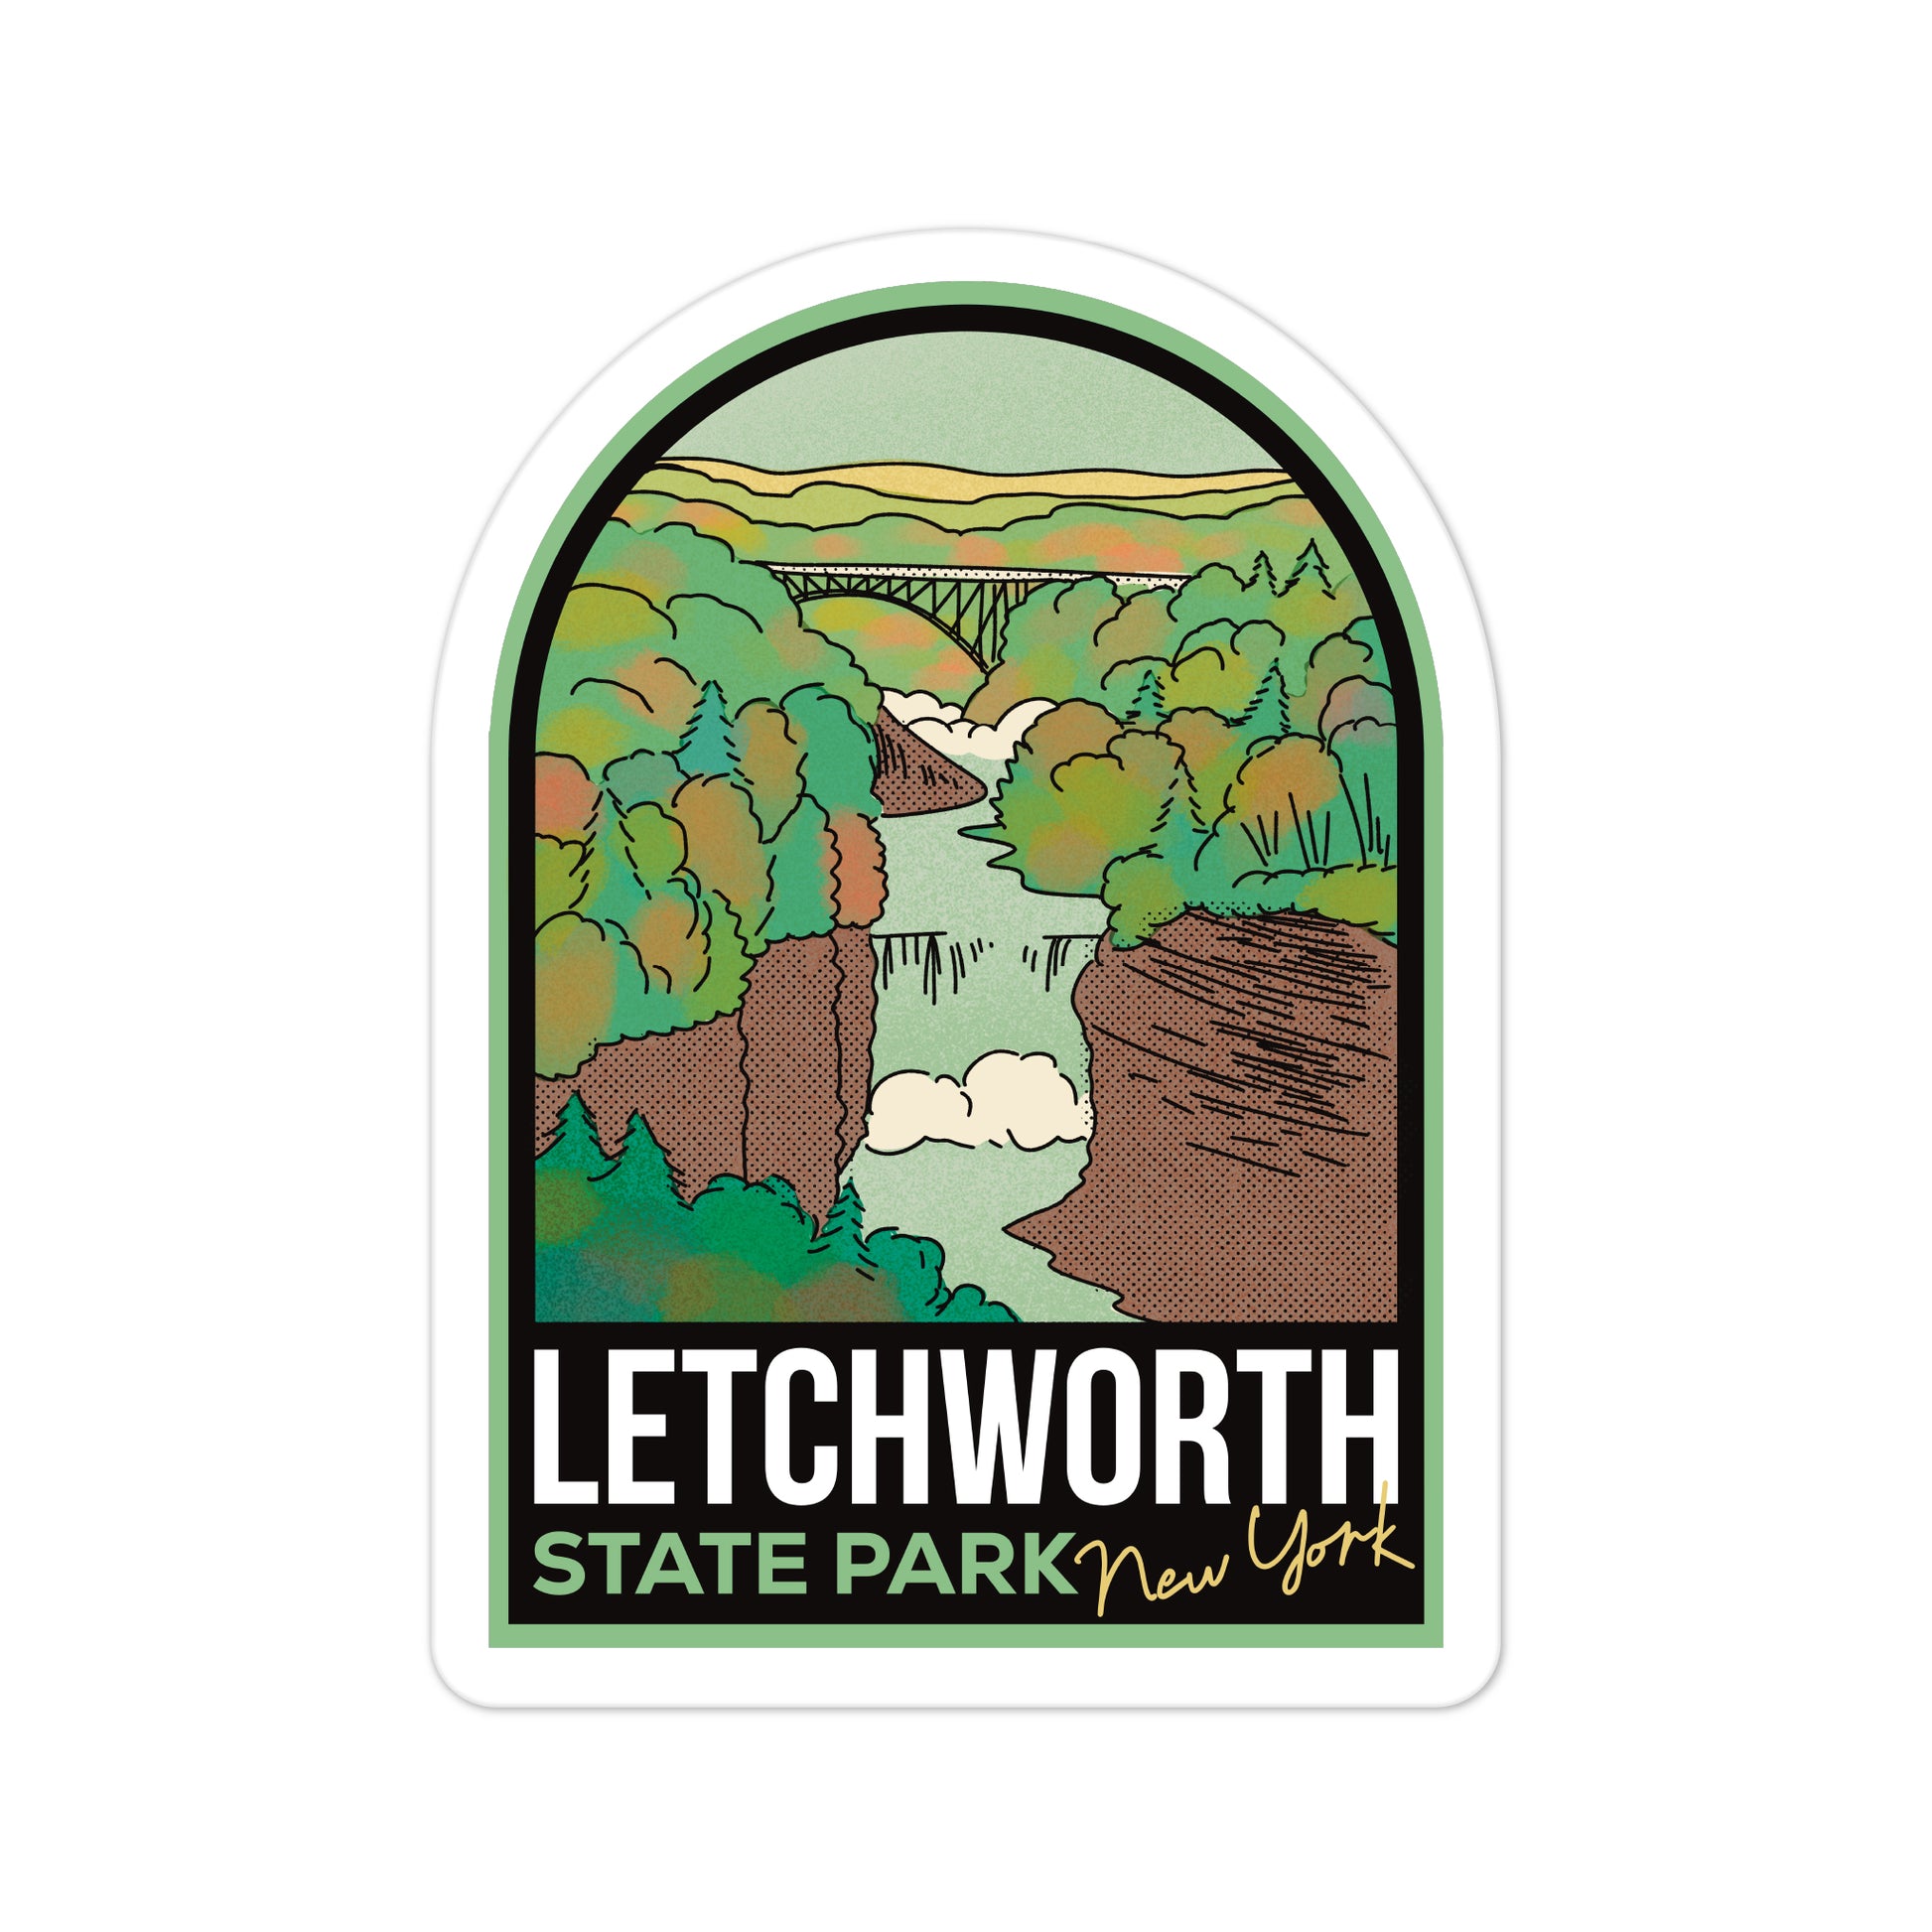 A sticker of Letchworth State Park